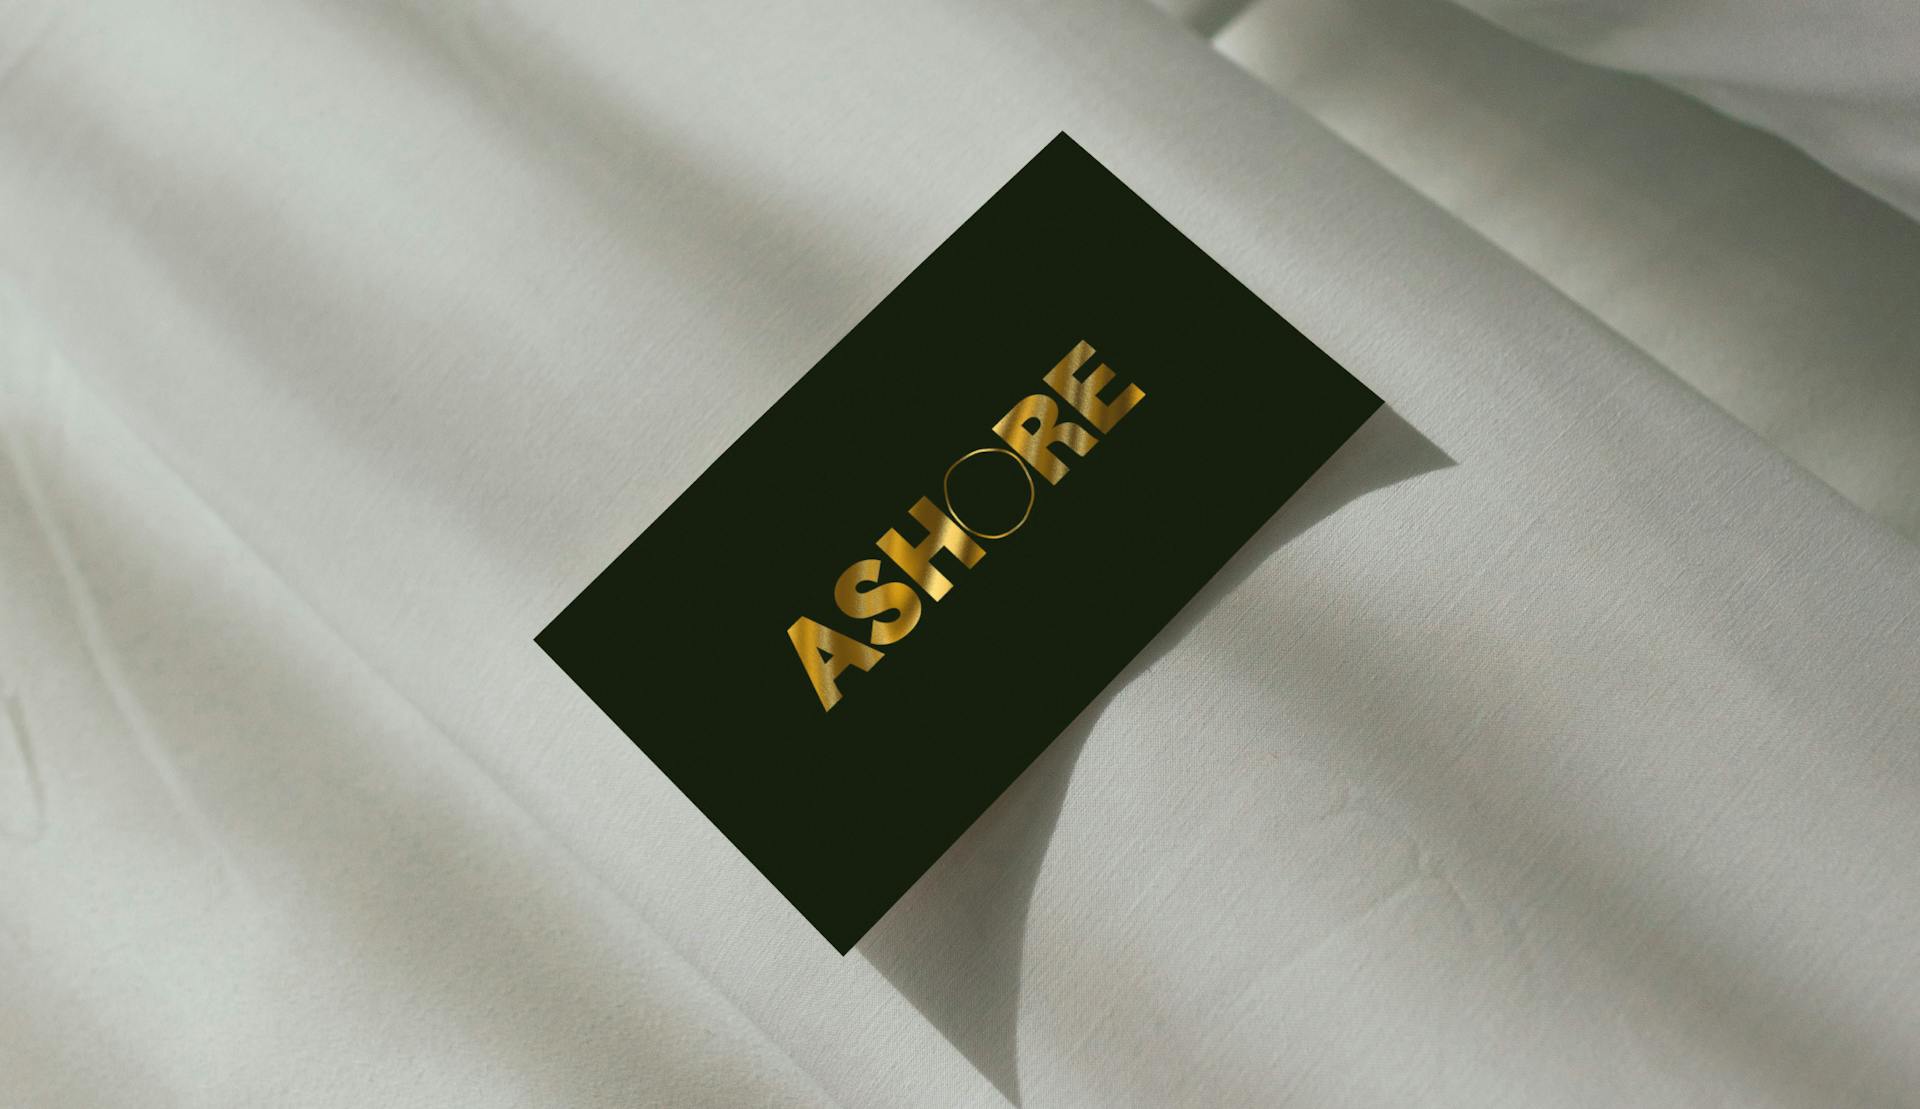 The Ashore gift card lying on a bed